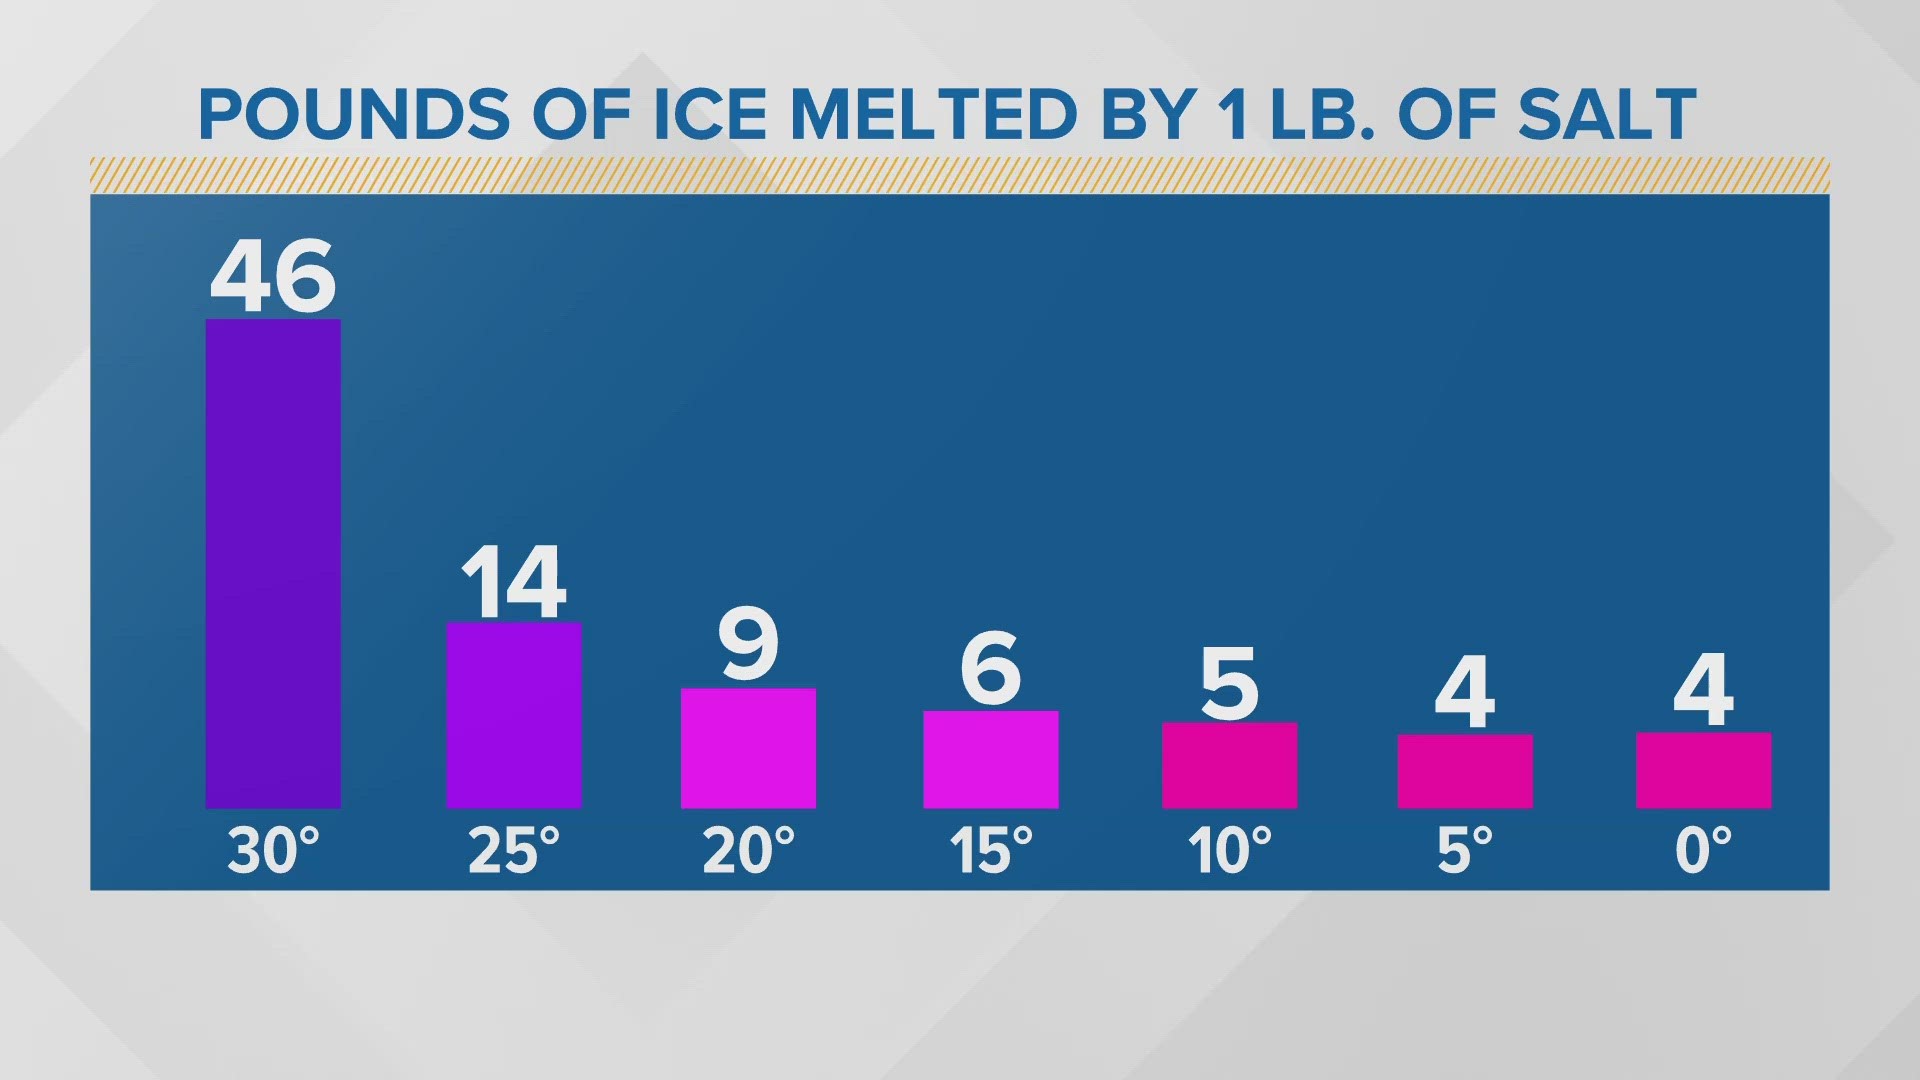 Roads may become more slick when temperatures drop, because the salt used to melt ice struggles to keep up.